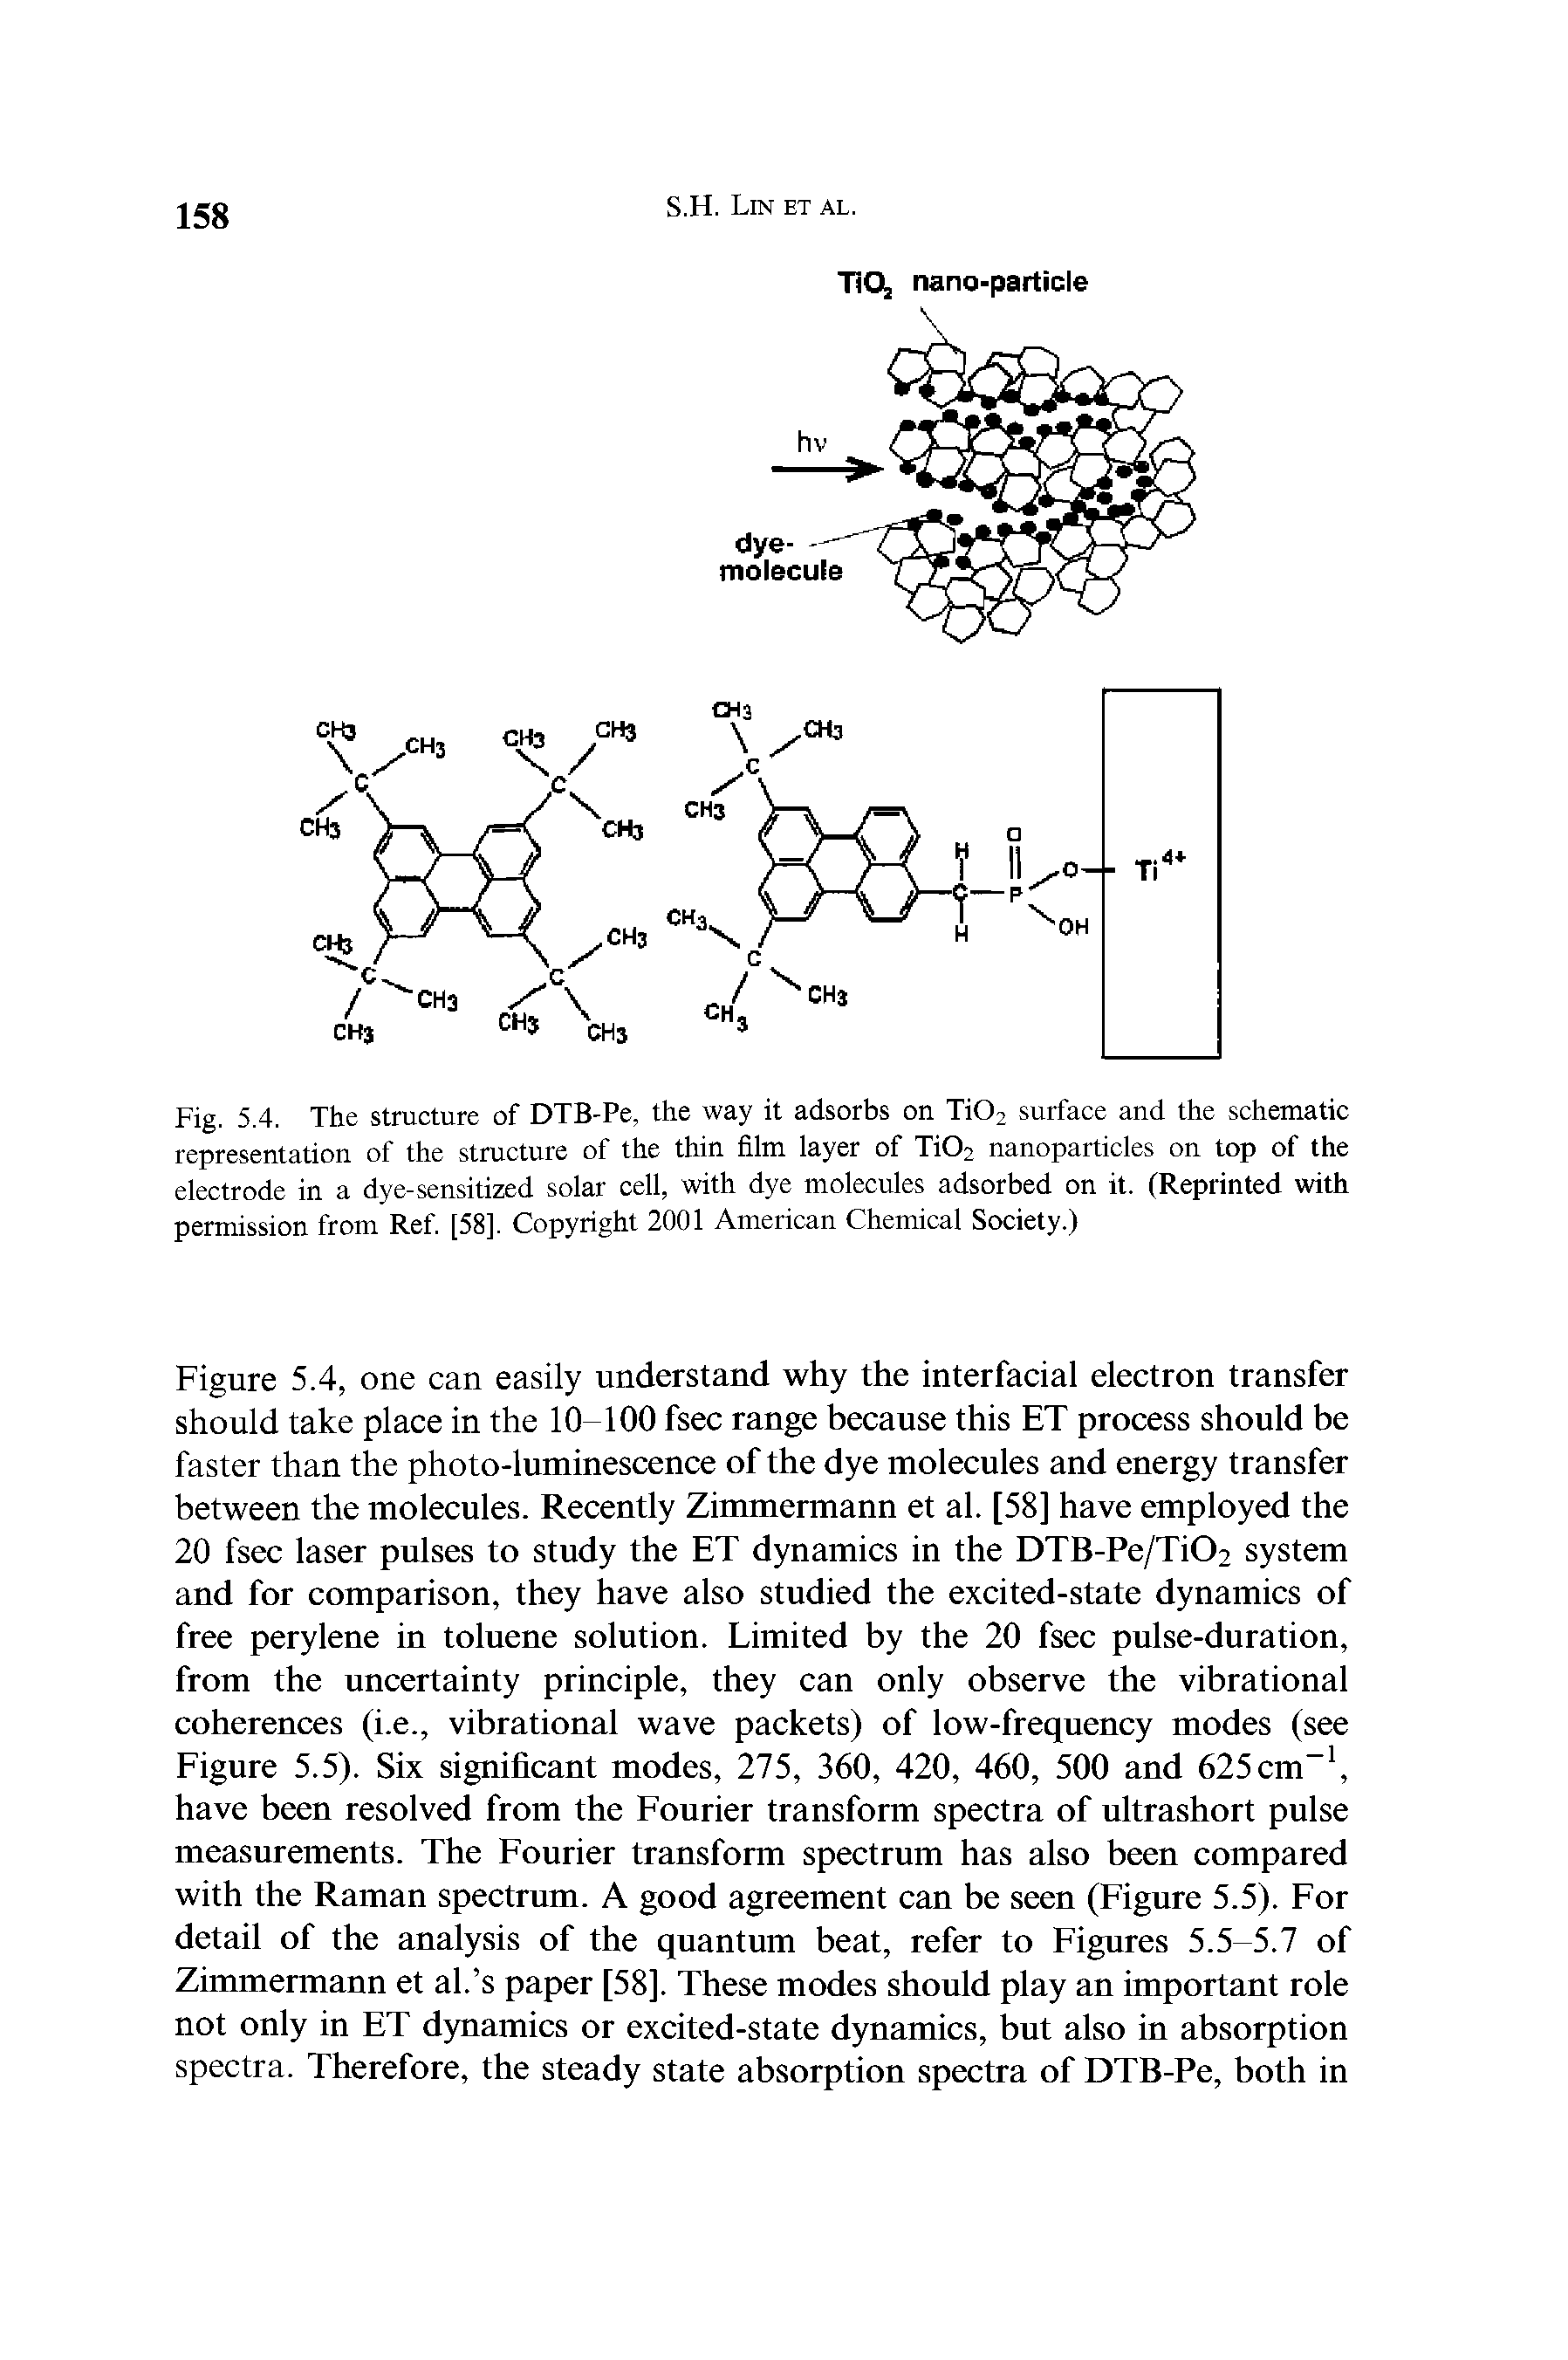 Figure 5.4, one can easily understand why the interfacial electron transfer should take place in the 10-100 fsec range because this ET process should be faster than the photo-luminescence of the dye molecules and energy transfer between the molecules. Recently Zimmermann et al. [58] have employed the 20 fsec laser pulses to study the ET dynamics in the DTB-Pe/TiC>2 system and for comparison, they have also studied the excited-state dynamics of free perylene in toluene solution. Limited by the 20 fsec pulse-duration, from the uncertainty principle, they can only observe the vibrational coherences (i.e., vibrational wave packets) of low-frequency modes (see Figure 5.5). Six significant modes, 275, 360, 420, 460, 500 and 625 cm-1, have been resolved from the Fourier transform spectra of ultrashort pulse measurements. The Fourier transform spectrum has also been compared with the Raman spectrum. A good agreement can be seen (Figure 5.5). For detail of the analysis of the quantum beat, refer to Figures 5.5-5.7 of Zimmermann et al. s paper [58], These modes should play an important role not only in ET dynamics or excited-state dynamics, but also in absorption spectra. Therefore, the steady state absorption spectra of DTB-Pe, both in...